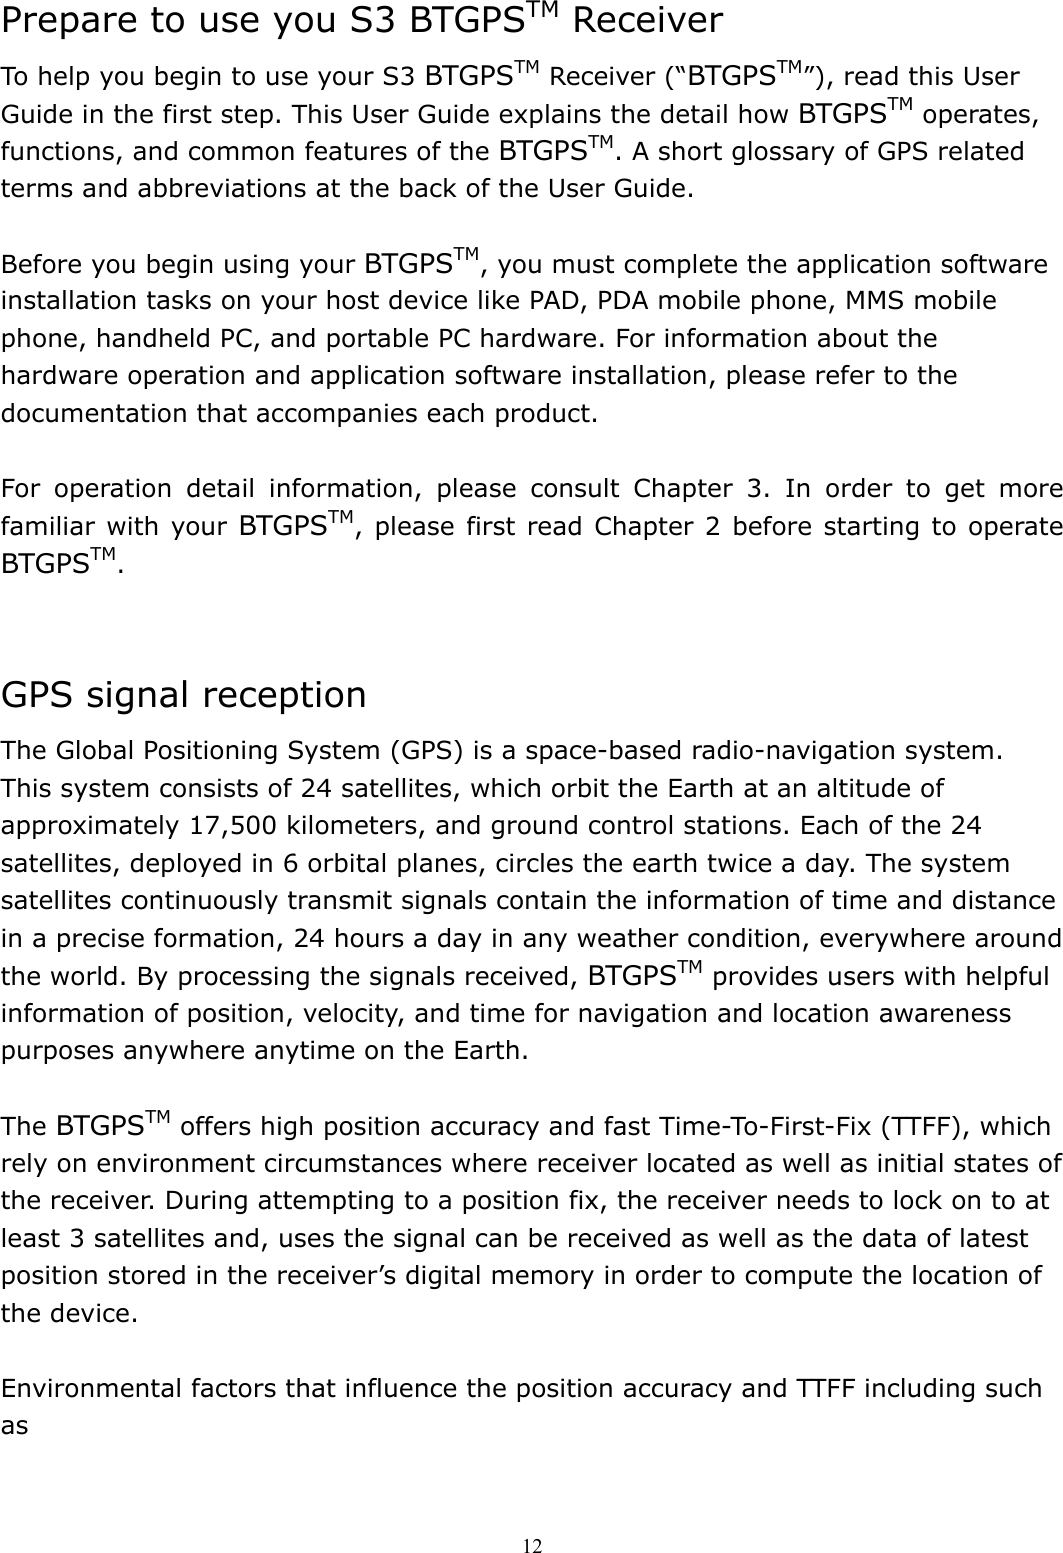  12Prepare to use you S3 BTGPSTM Receiver To help you begin to use your S3 BTGPSTM Receiver (“BTGPSTM”), read this User Guide in the first step. This User Guide explains the detail how BTGPSTM operates, functions, and common features of the BTGPSTM. A short glossary of GPS related terms and abbreviations at the back of the User Guide.  Before you begin using your BTGPSTM, you must complete the application software installation tasks on your host device like PAD, PDA mobile phone, MMS mobile phone, handheld PC, and portable PC hardware. For information about the hardware operation and application software installation, please refer to the documentation that accompanies each product.  For operation detail information, please consult Chapter 3. In order to get more familiar with your BTGPSTM, please first read Chapter 2 before starting to operate BTGPSTM.   GPS signal reception The Global Positioning System (GPS) is a space-based radio-navigation system. This system consists of 24 satellites, which orbit the Earth at an altitude of approximately 17,500 kilometers, and ground control stations. Each of the 24 satellites, deployed in 6 orbital planes, circles the earth twice a day. The system satellites continuously transmit signals contain the information of time and distance in a precise formation, 24 hours a day in any weather condition, everywhere around the world. By processing the signals received, BTGPSTM provides users with helpful information of position, velocity, and time for navigation and location awareness purposes anywhere anytime on the Earth.  The BTGPSTM offers high position accuracy and fast Time-To-First-Fix (TTFF), which rely on environment circumstances where receiver located as well as initial states of the receiver. During attempting to a position fix, the receiver needs to lock on to at least 3 satellites and, uses the signal can be received as well as the data of latest position stored in the receiver’s digital memory in order to compute the location of the device.    Environmental factors that influence the position accuracy and TTFF including such as  